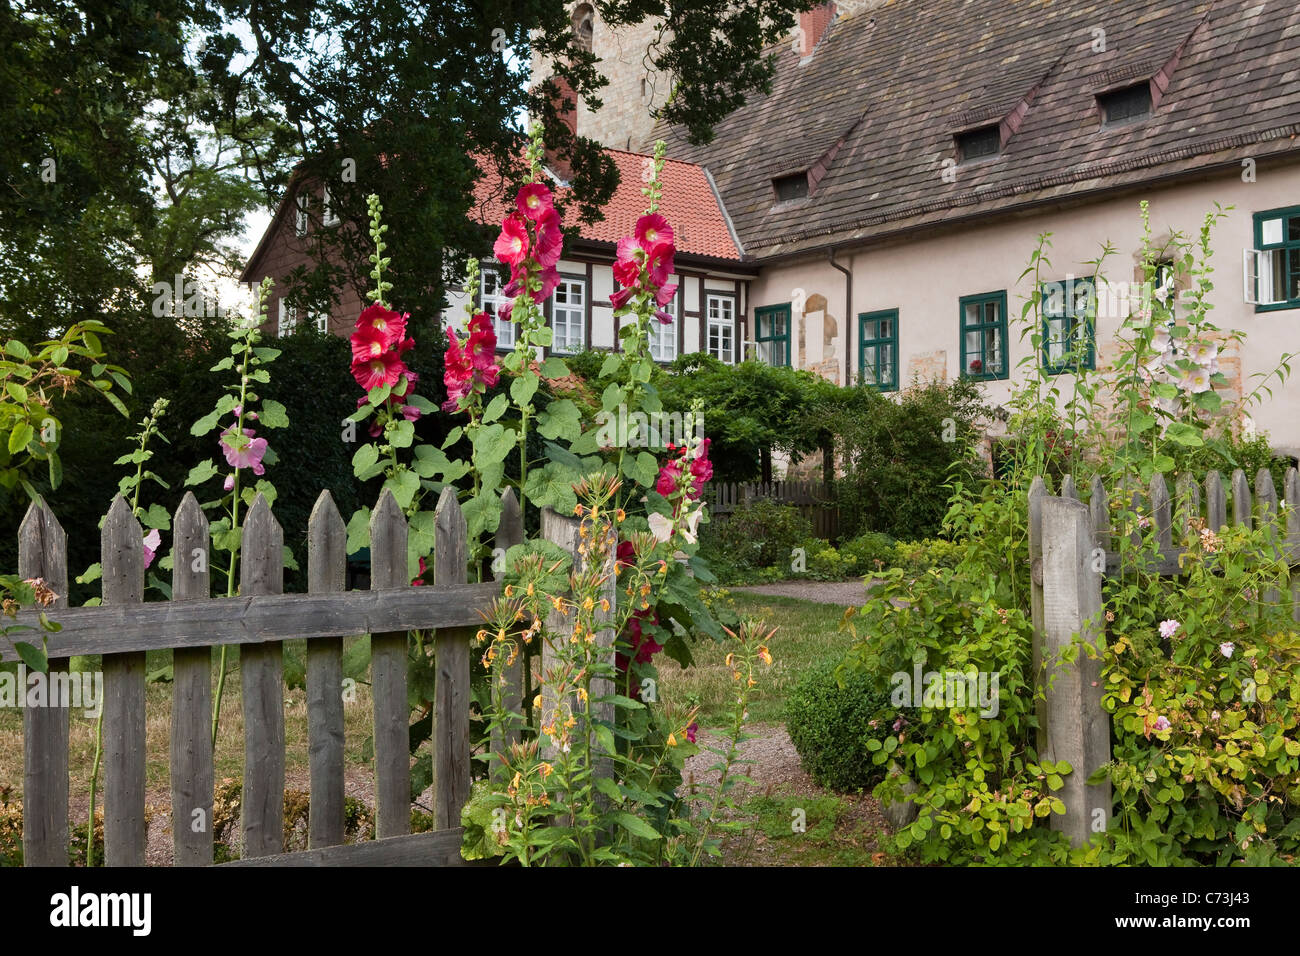 Fischbeck Abbey, Garden of the abbey with hollyhocks, Fischbeck, Hessisch Oldendorf, Lower Saxony, Germany Stock Photo